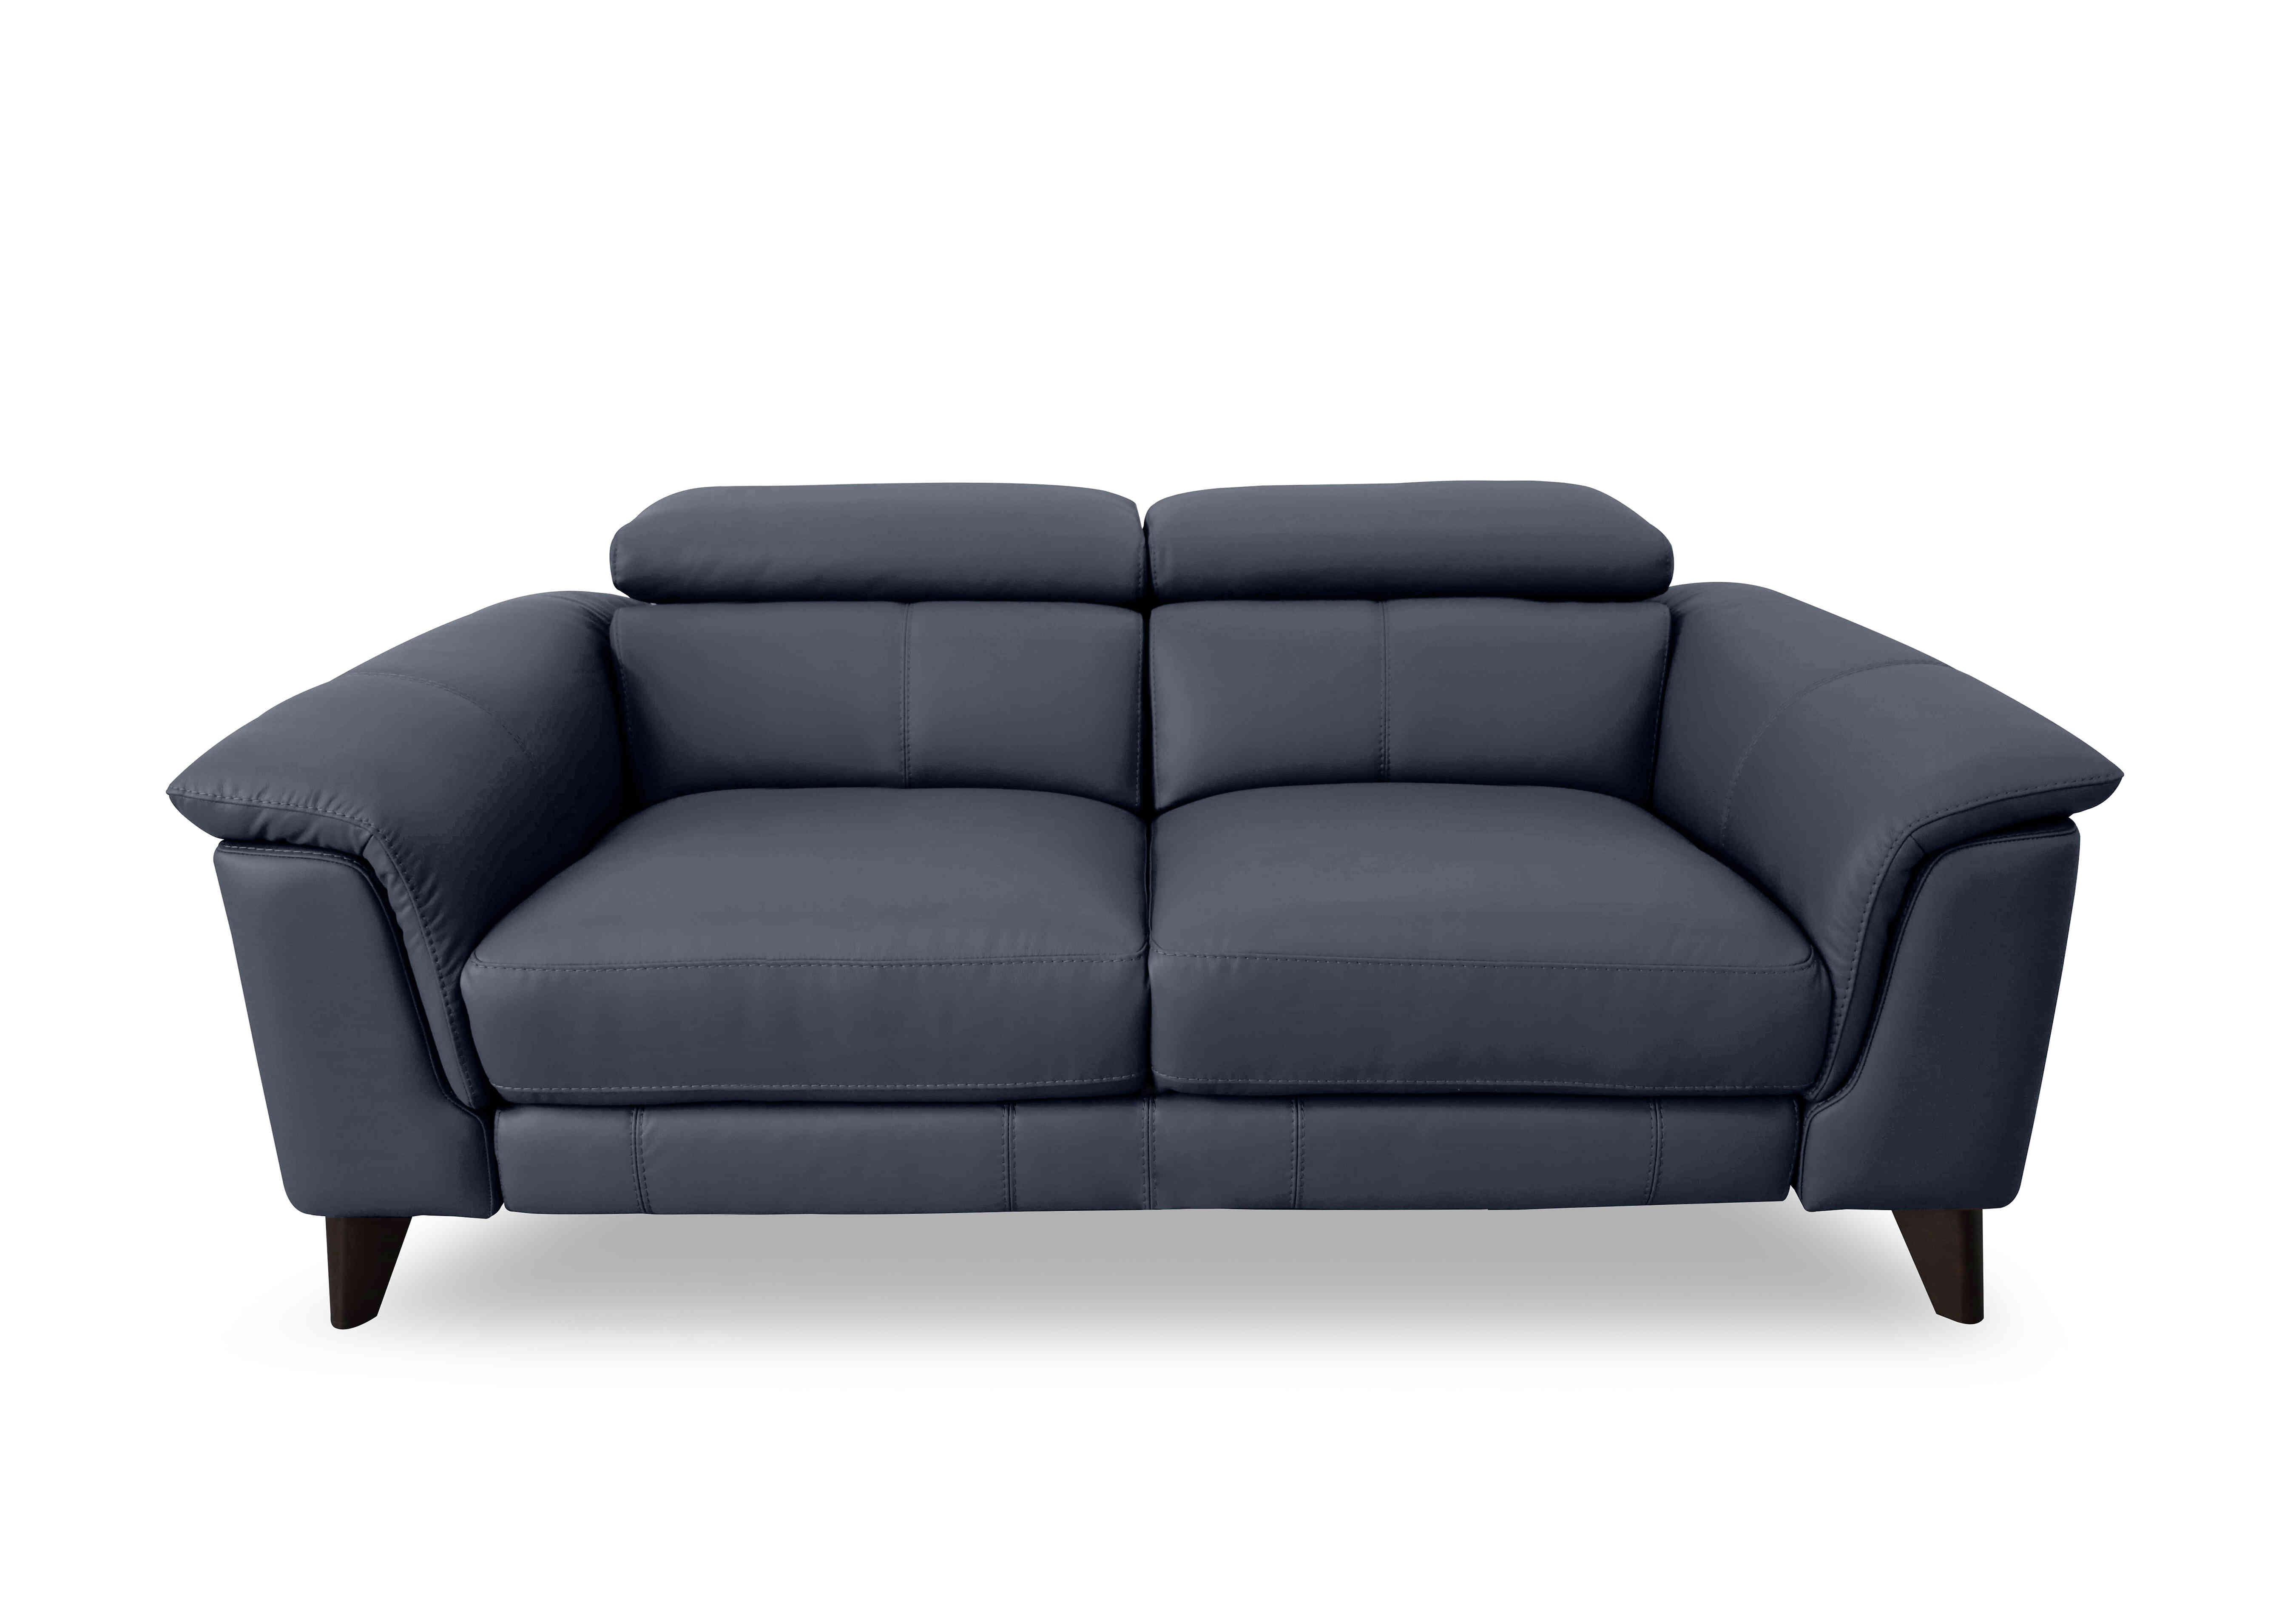 Wade 3 Seater Leather Sofa in Bv-313e Ocean Blue on Furniture Village